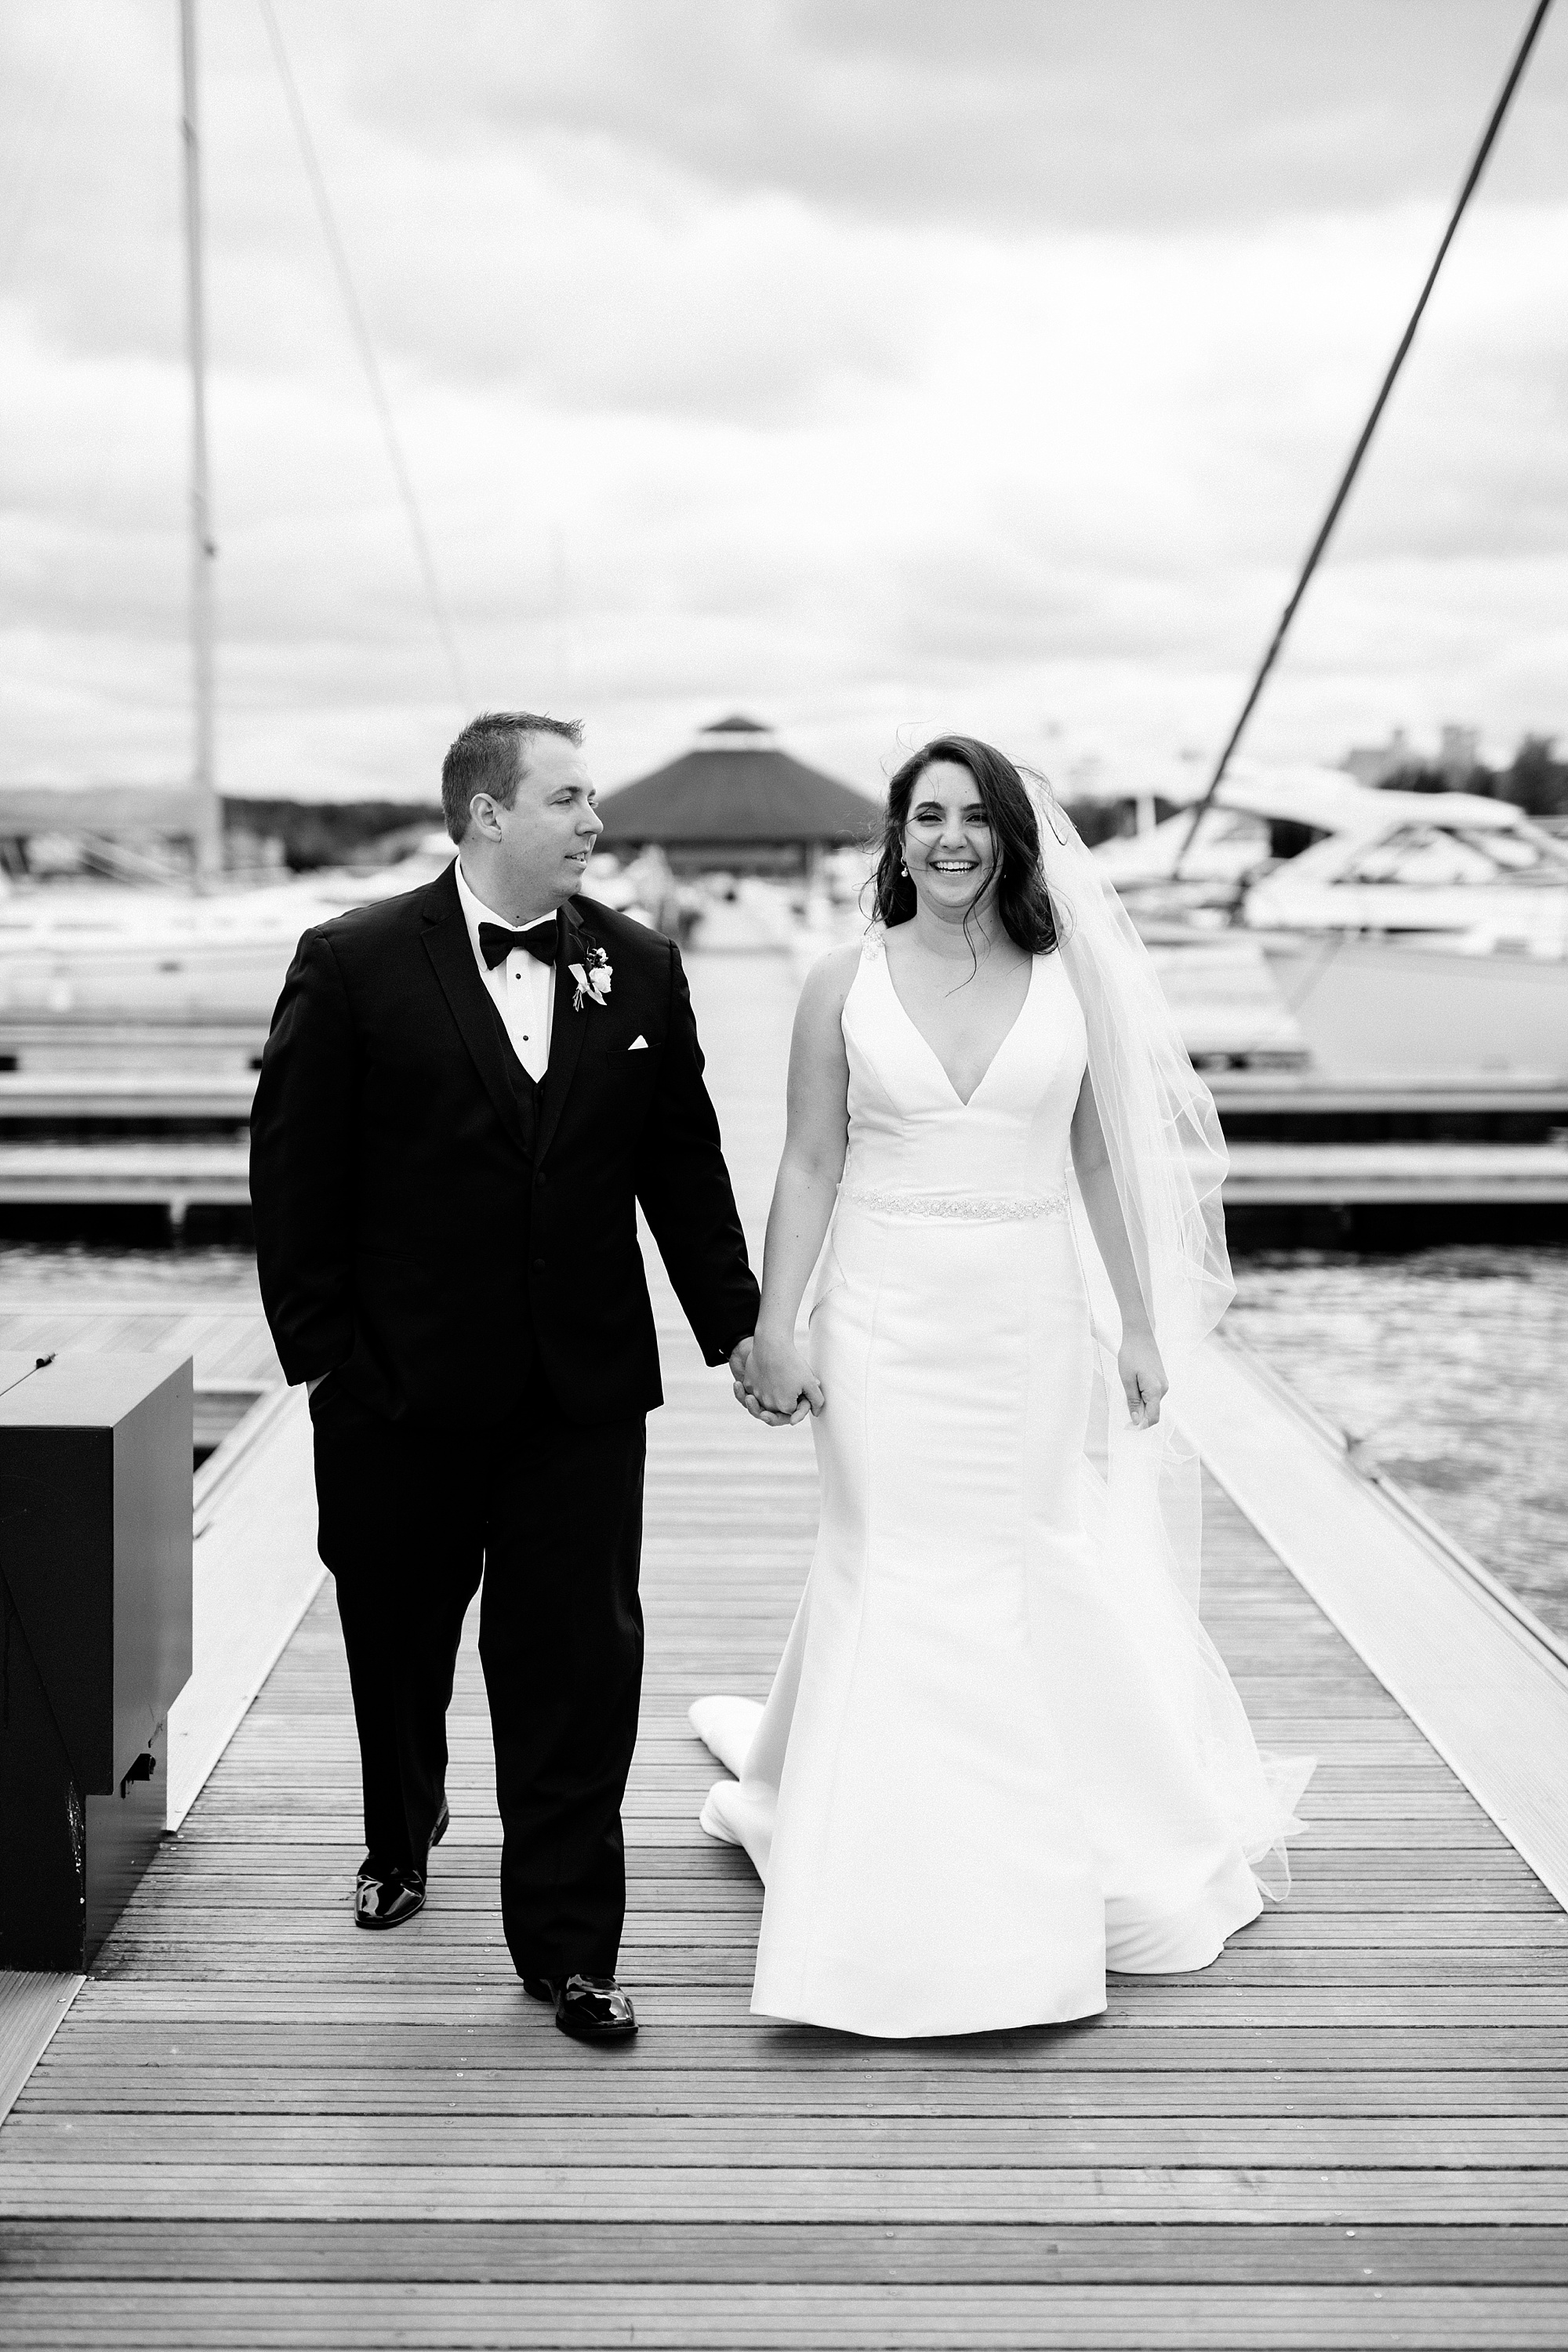 A classic navy black tie wedding at the Inn at Bay Harbor in Petoskey, Michigan by Breanne Rochelle Photography.